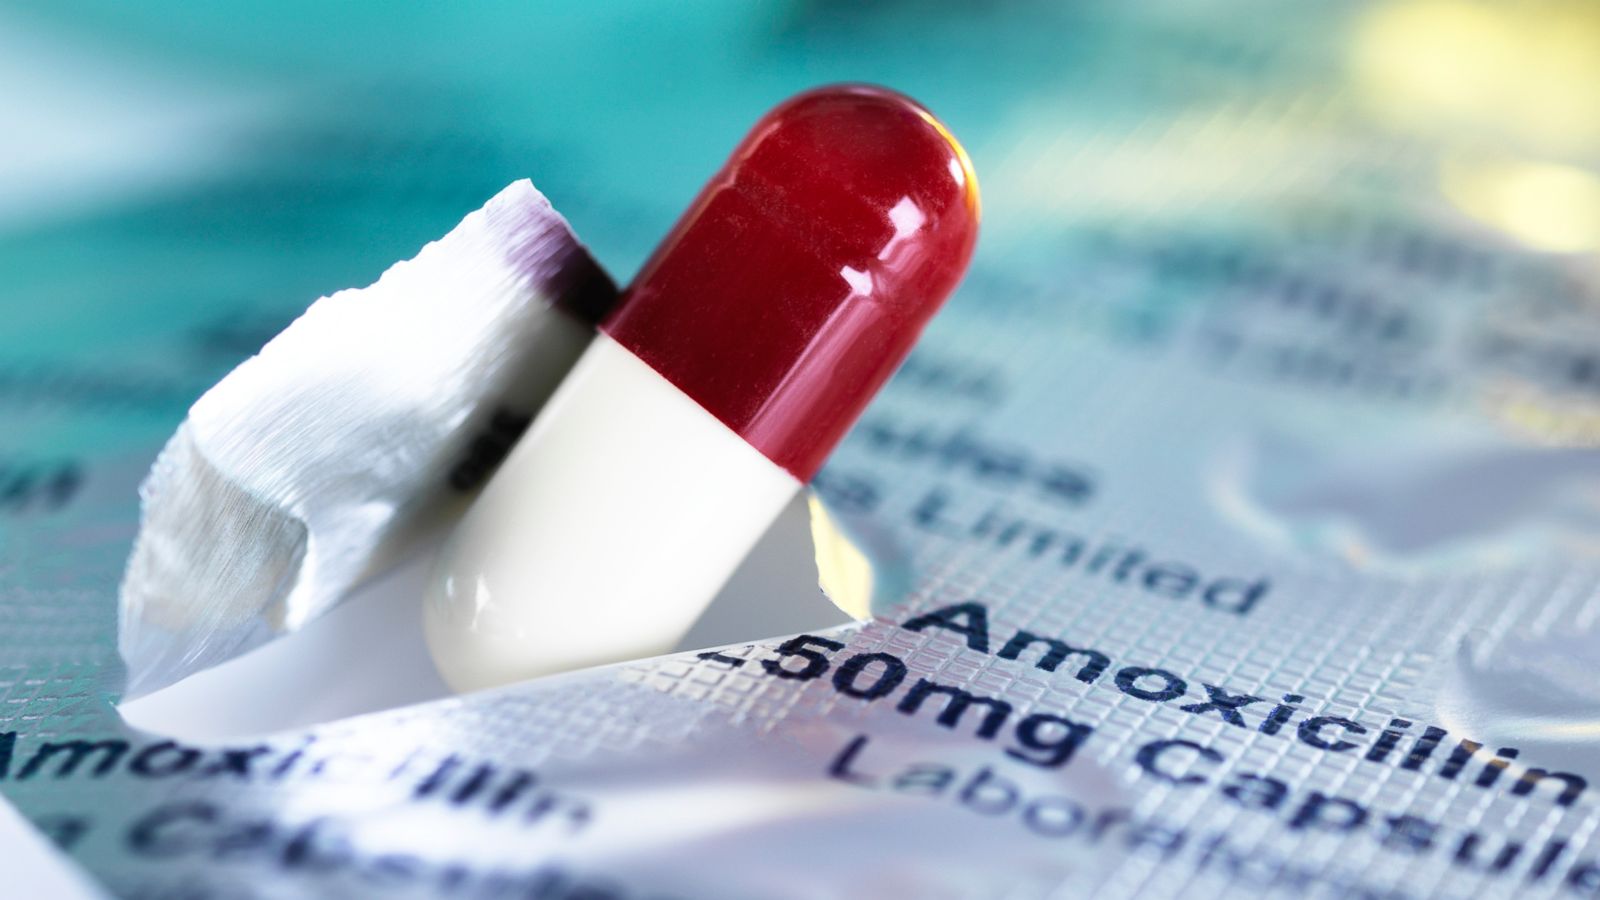 Antibiotics are overprescribed: Here's why that's not good, and what you need to know